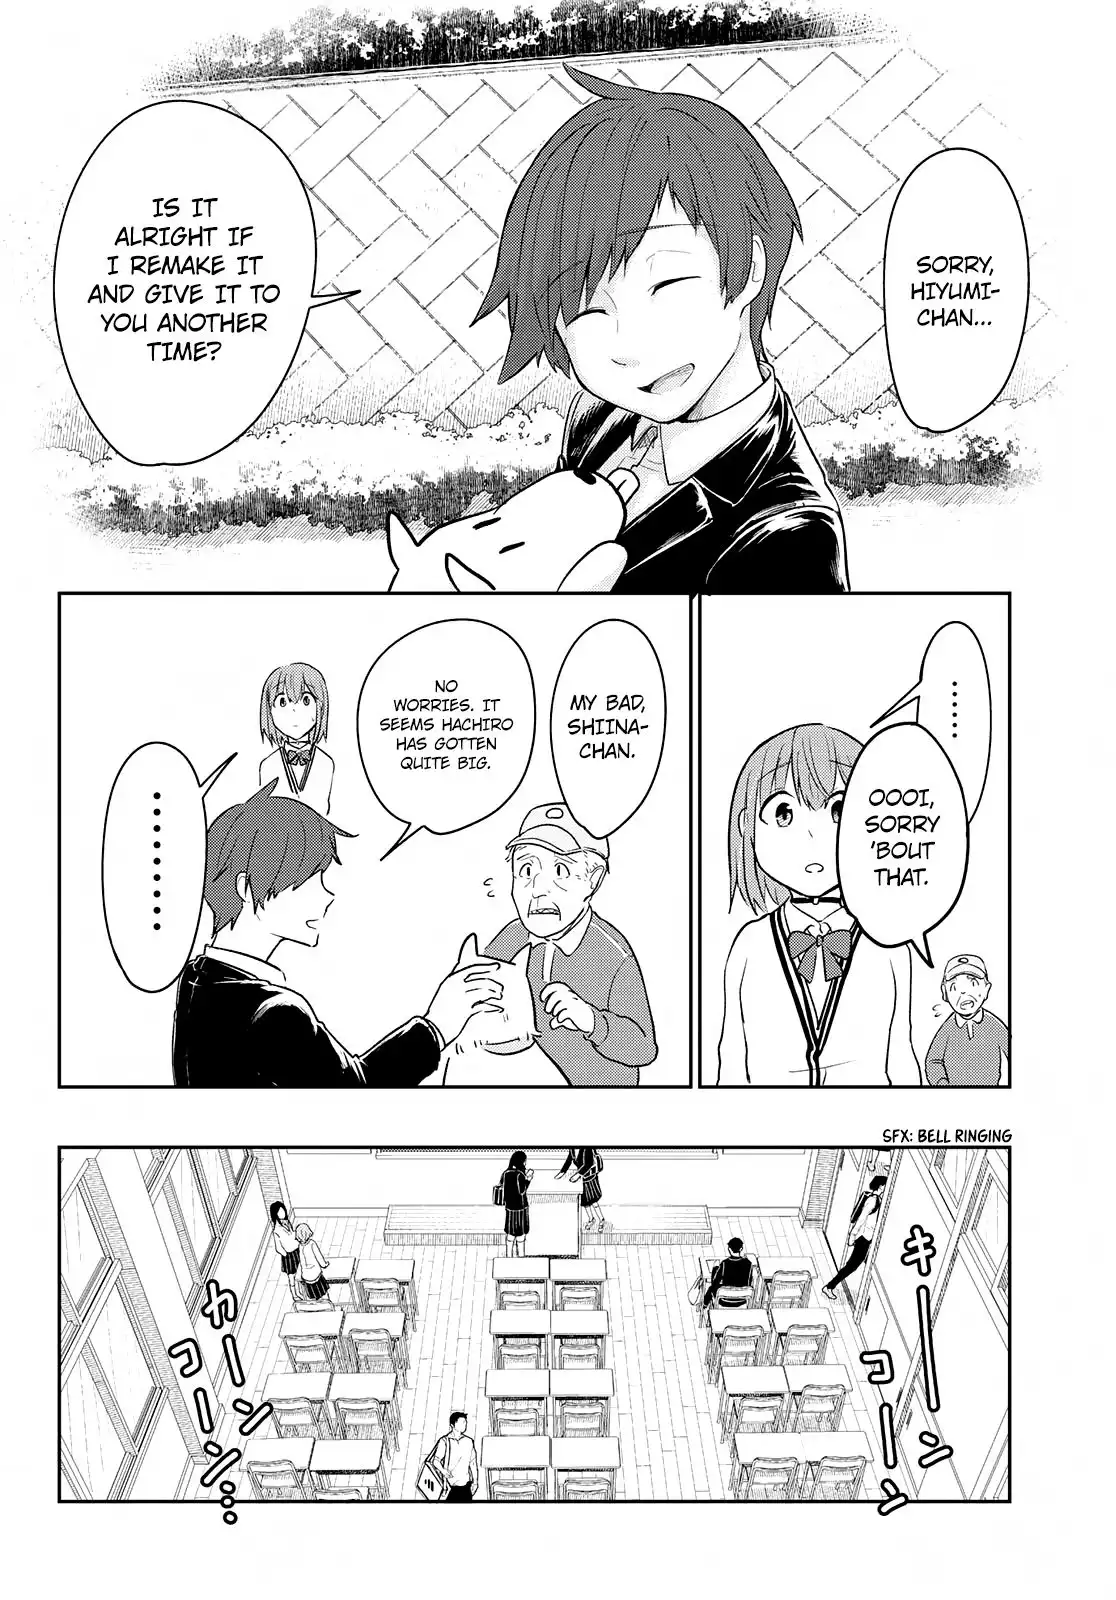 Hiyumi's Country Road Chapter 12